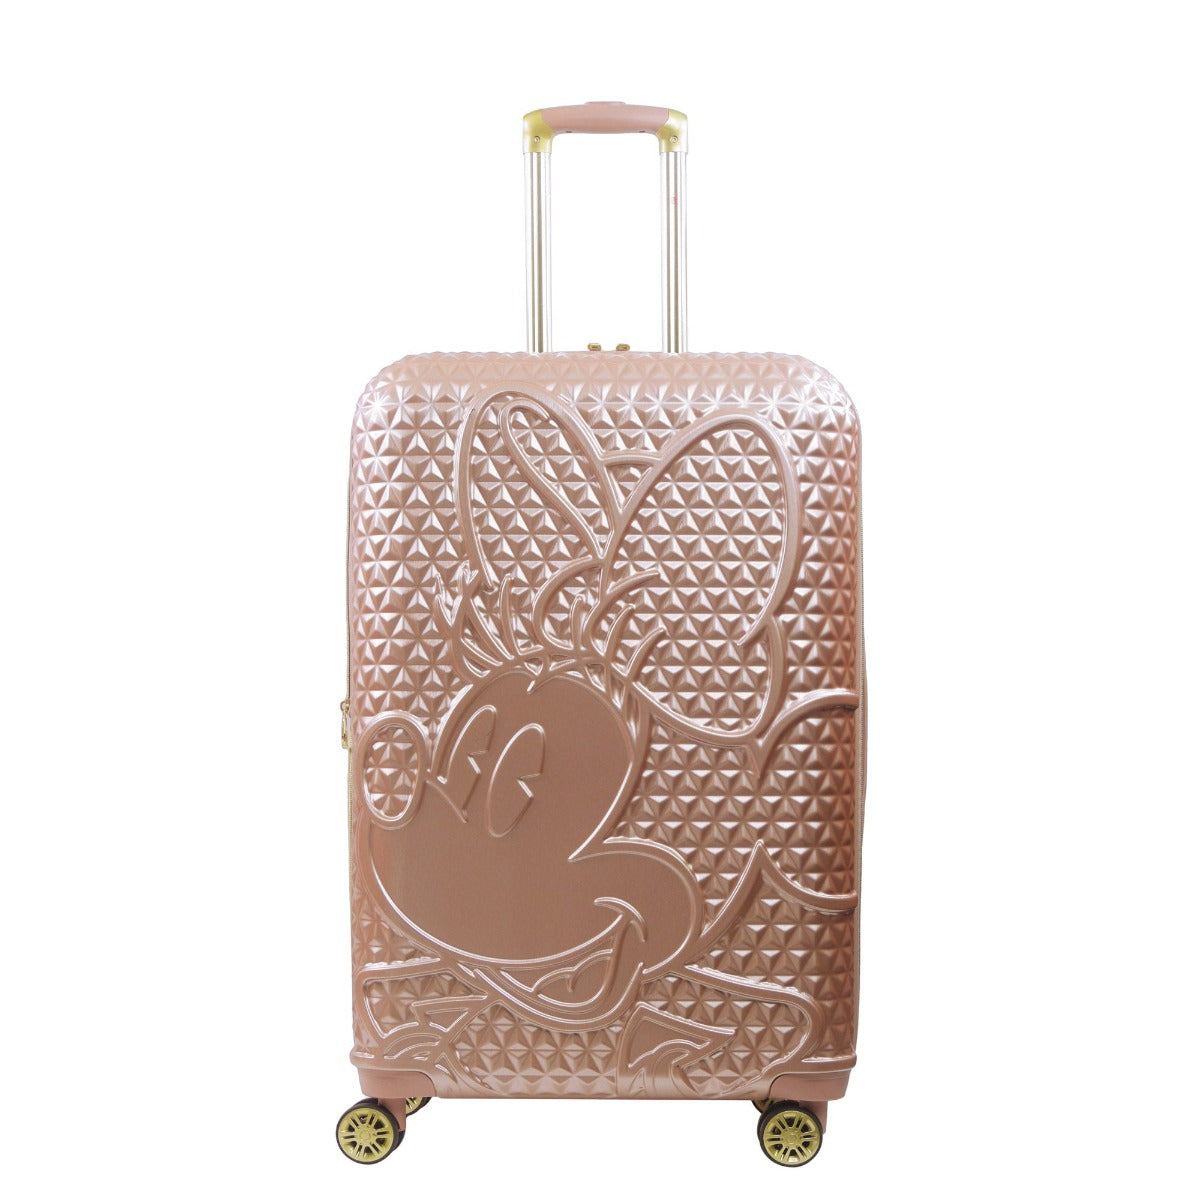 Ful Disney Minnie Mouse 30" luggage spinner rose gold - best checked suitcase for traveling